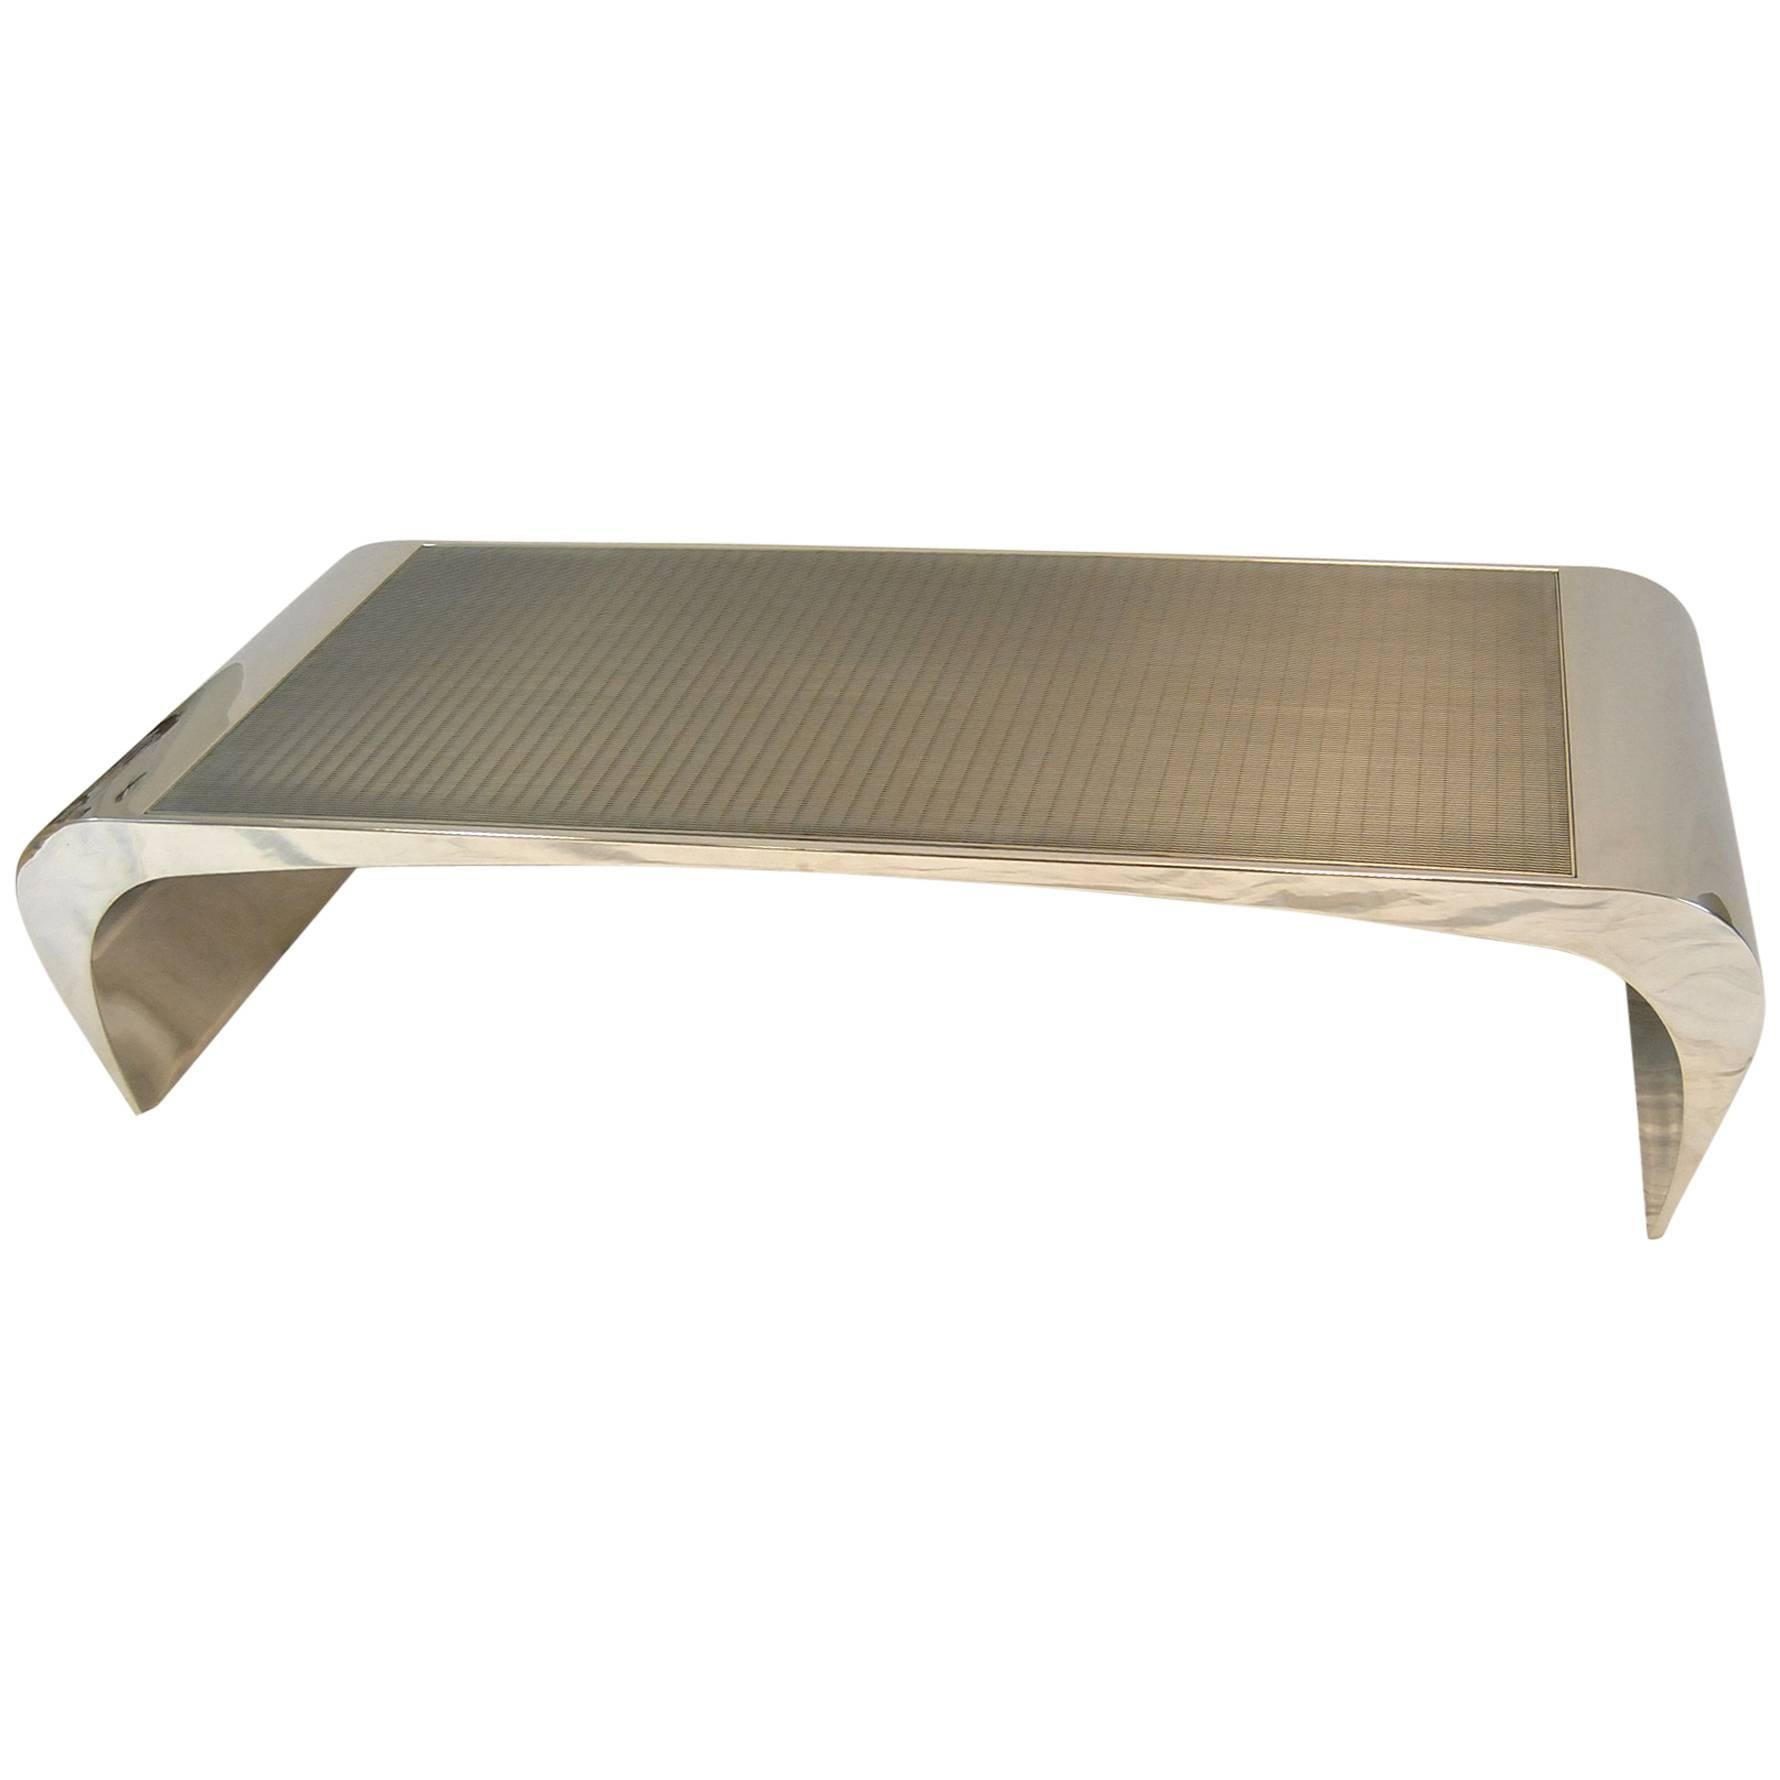 Brueton Selina K Stainless Steel Cocktail Table or Bench